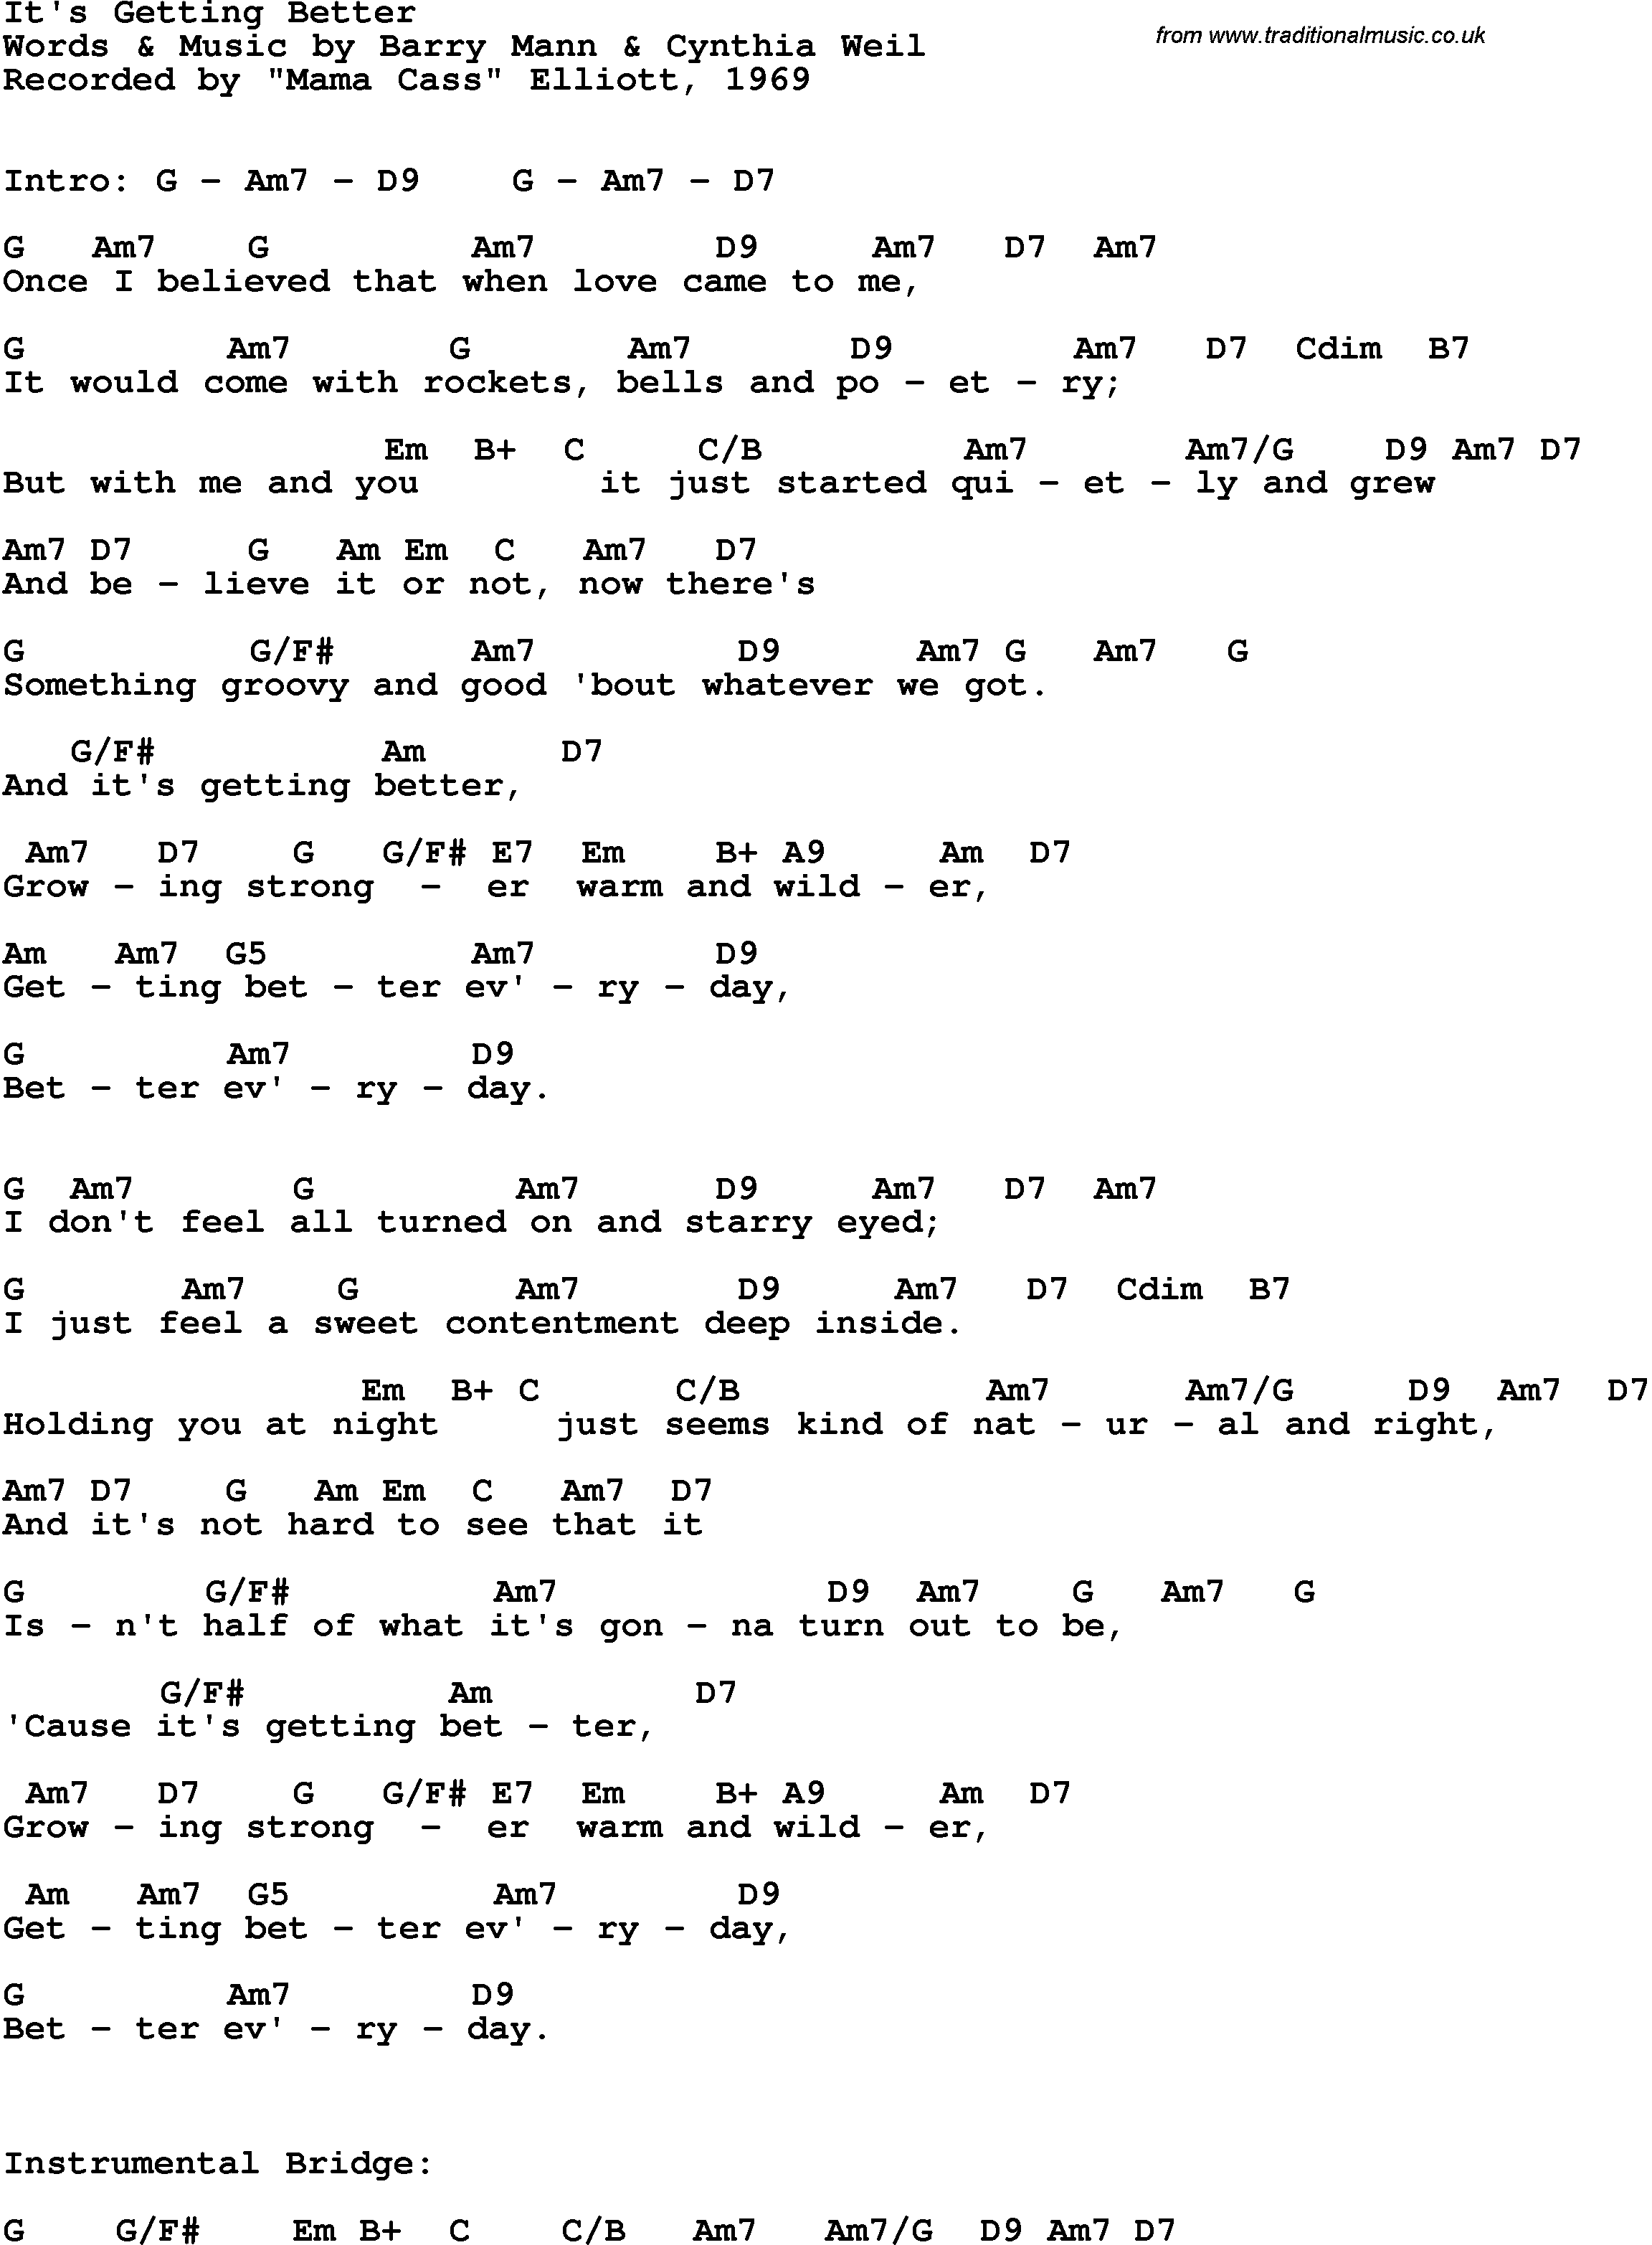 Song Lyrics with guitar chords for It's Getting Better - Mama Cass Elliott, 1969